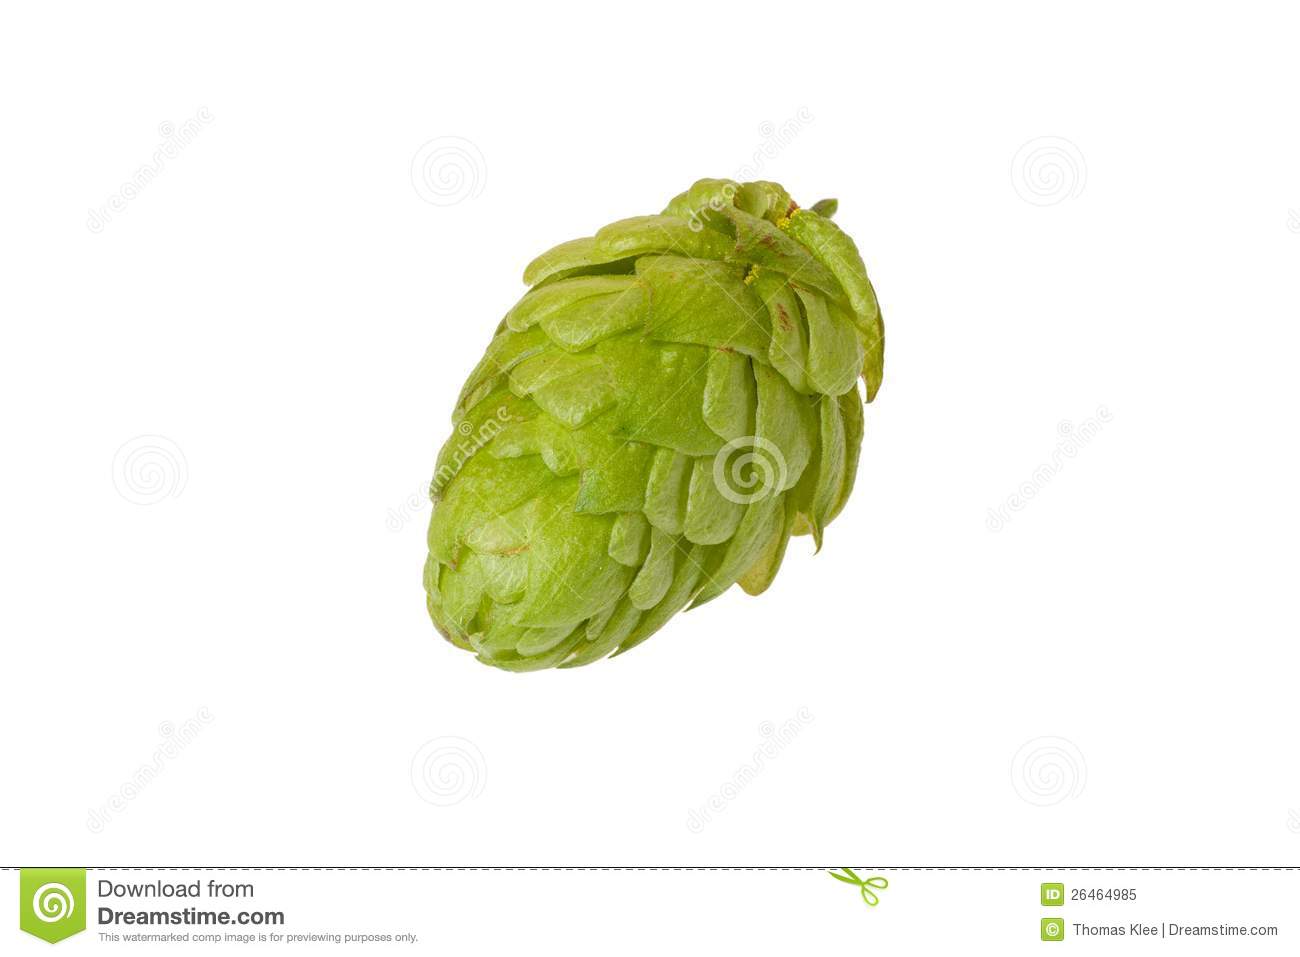 Hops Cone Royalty Free Stock Photo   Image  26464985